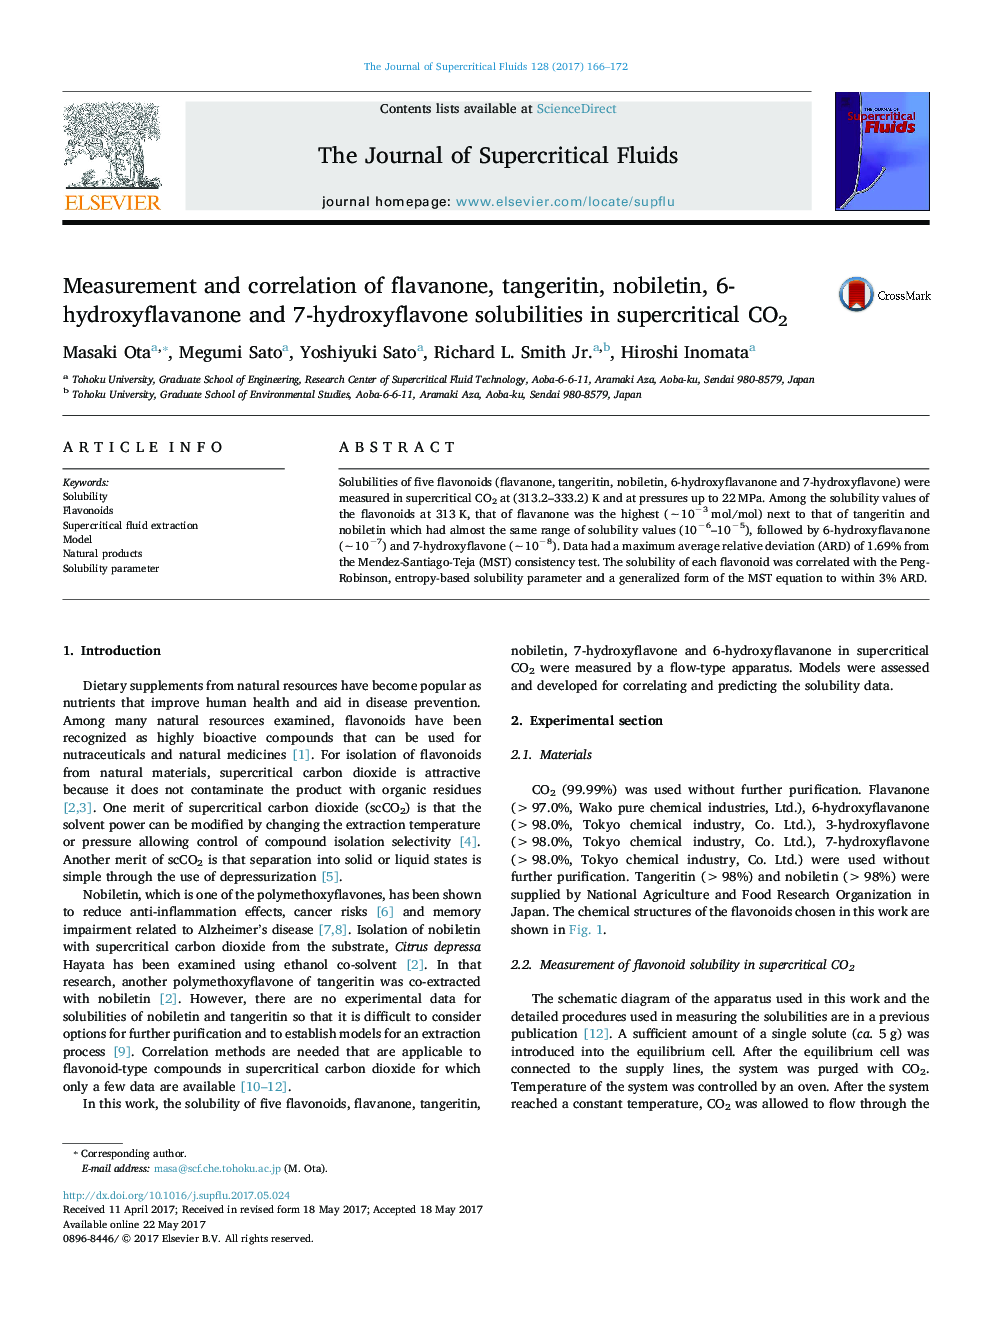 Measurement and correlation of flavanone, tangeritin, nobiletin, 6-hydroxyflavanone and 7-hydroxyflavone solubilities in supercritical CO2